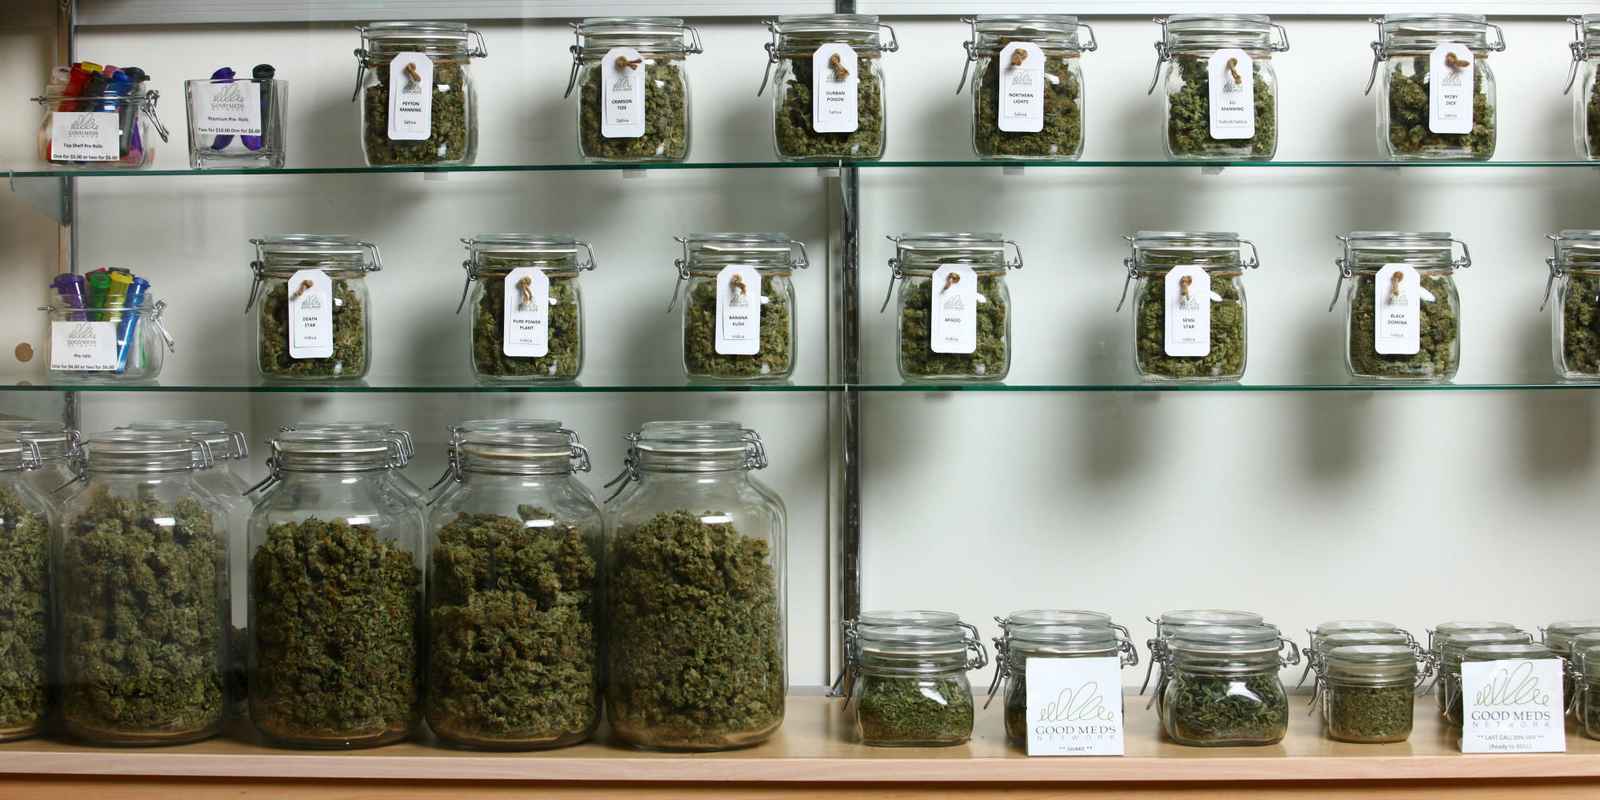 Lakewood, CO - MARCH, 4:   Jars of medical cannabis line the shelves inside a Good Meds medical cannabis center in Lakewood, Colorado, U.S., on Monday, March 4, 2013.   This is at a Good Meds medical cannabis center in Lakewood, and is one of the facilities that Kristi Kelly, Co-Founder of Good Meds Network, operates. (Photo by Matthew Staver/For The Washington Post via Getty Images)